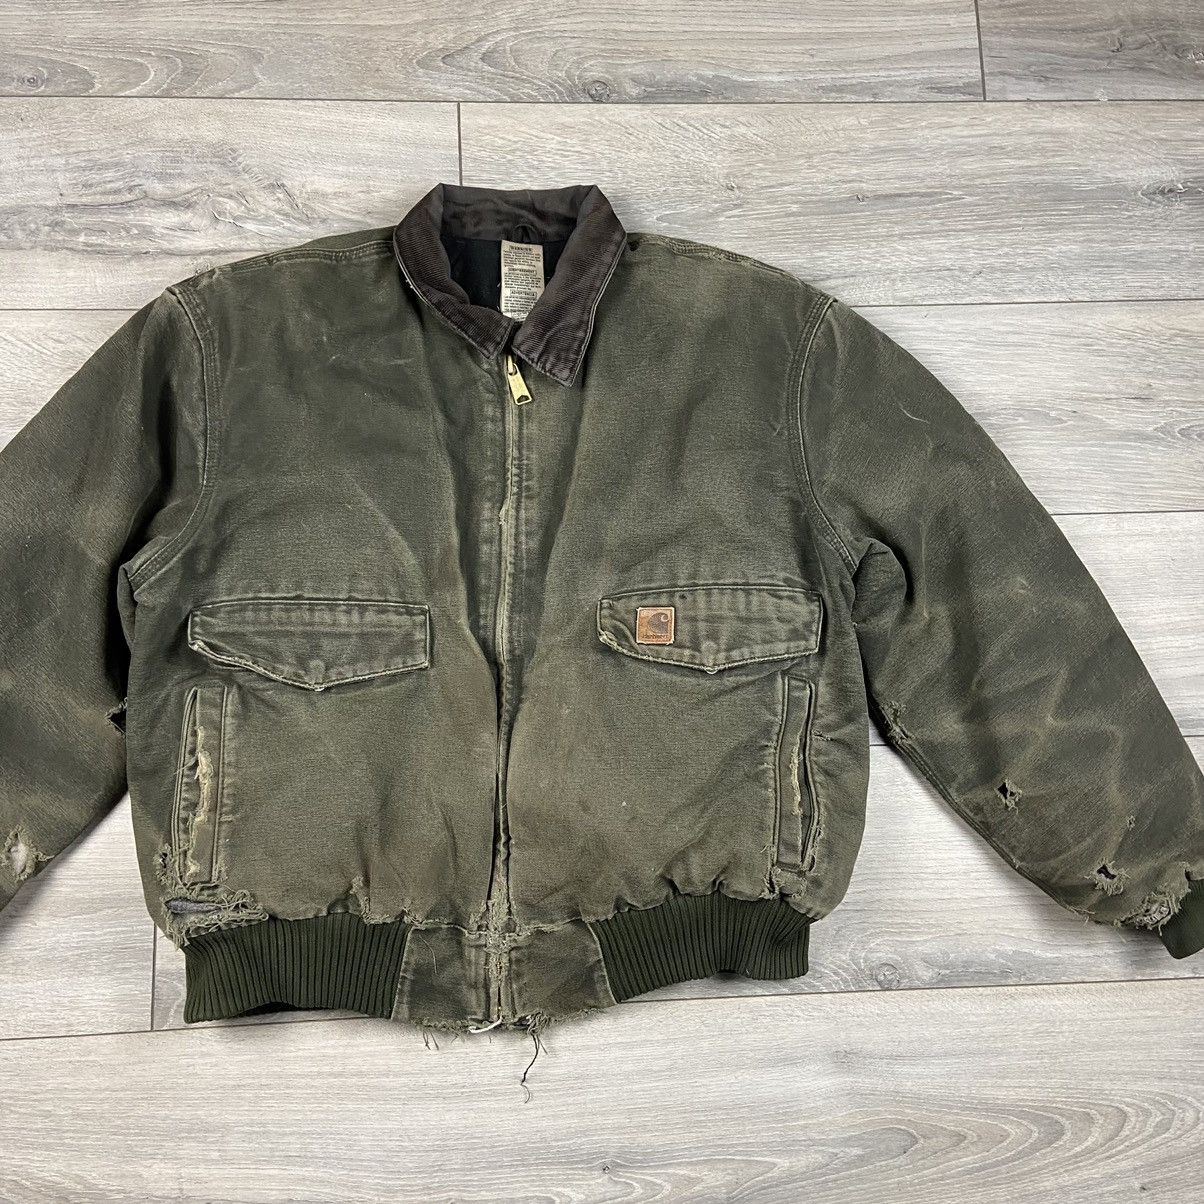 Vintage Carhartt distressed J165 Quilt Lined Duck Bomber Jacket 2XL Size US XXL / EU 58 / 5 - 1 Preview